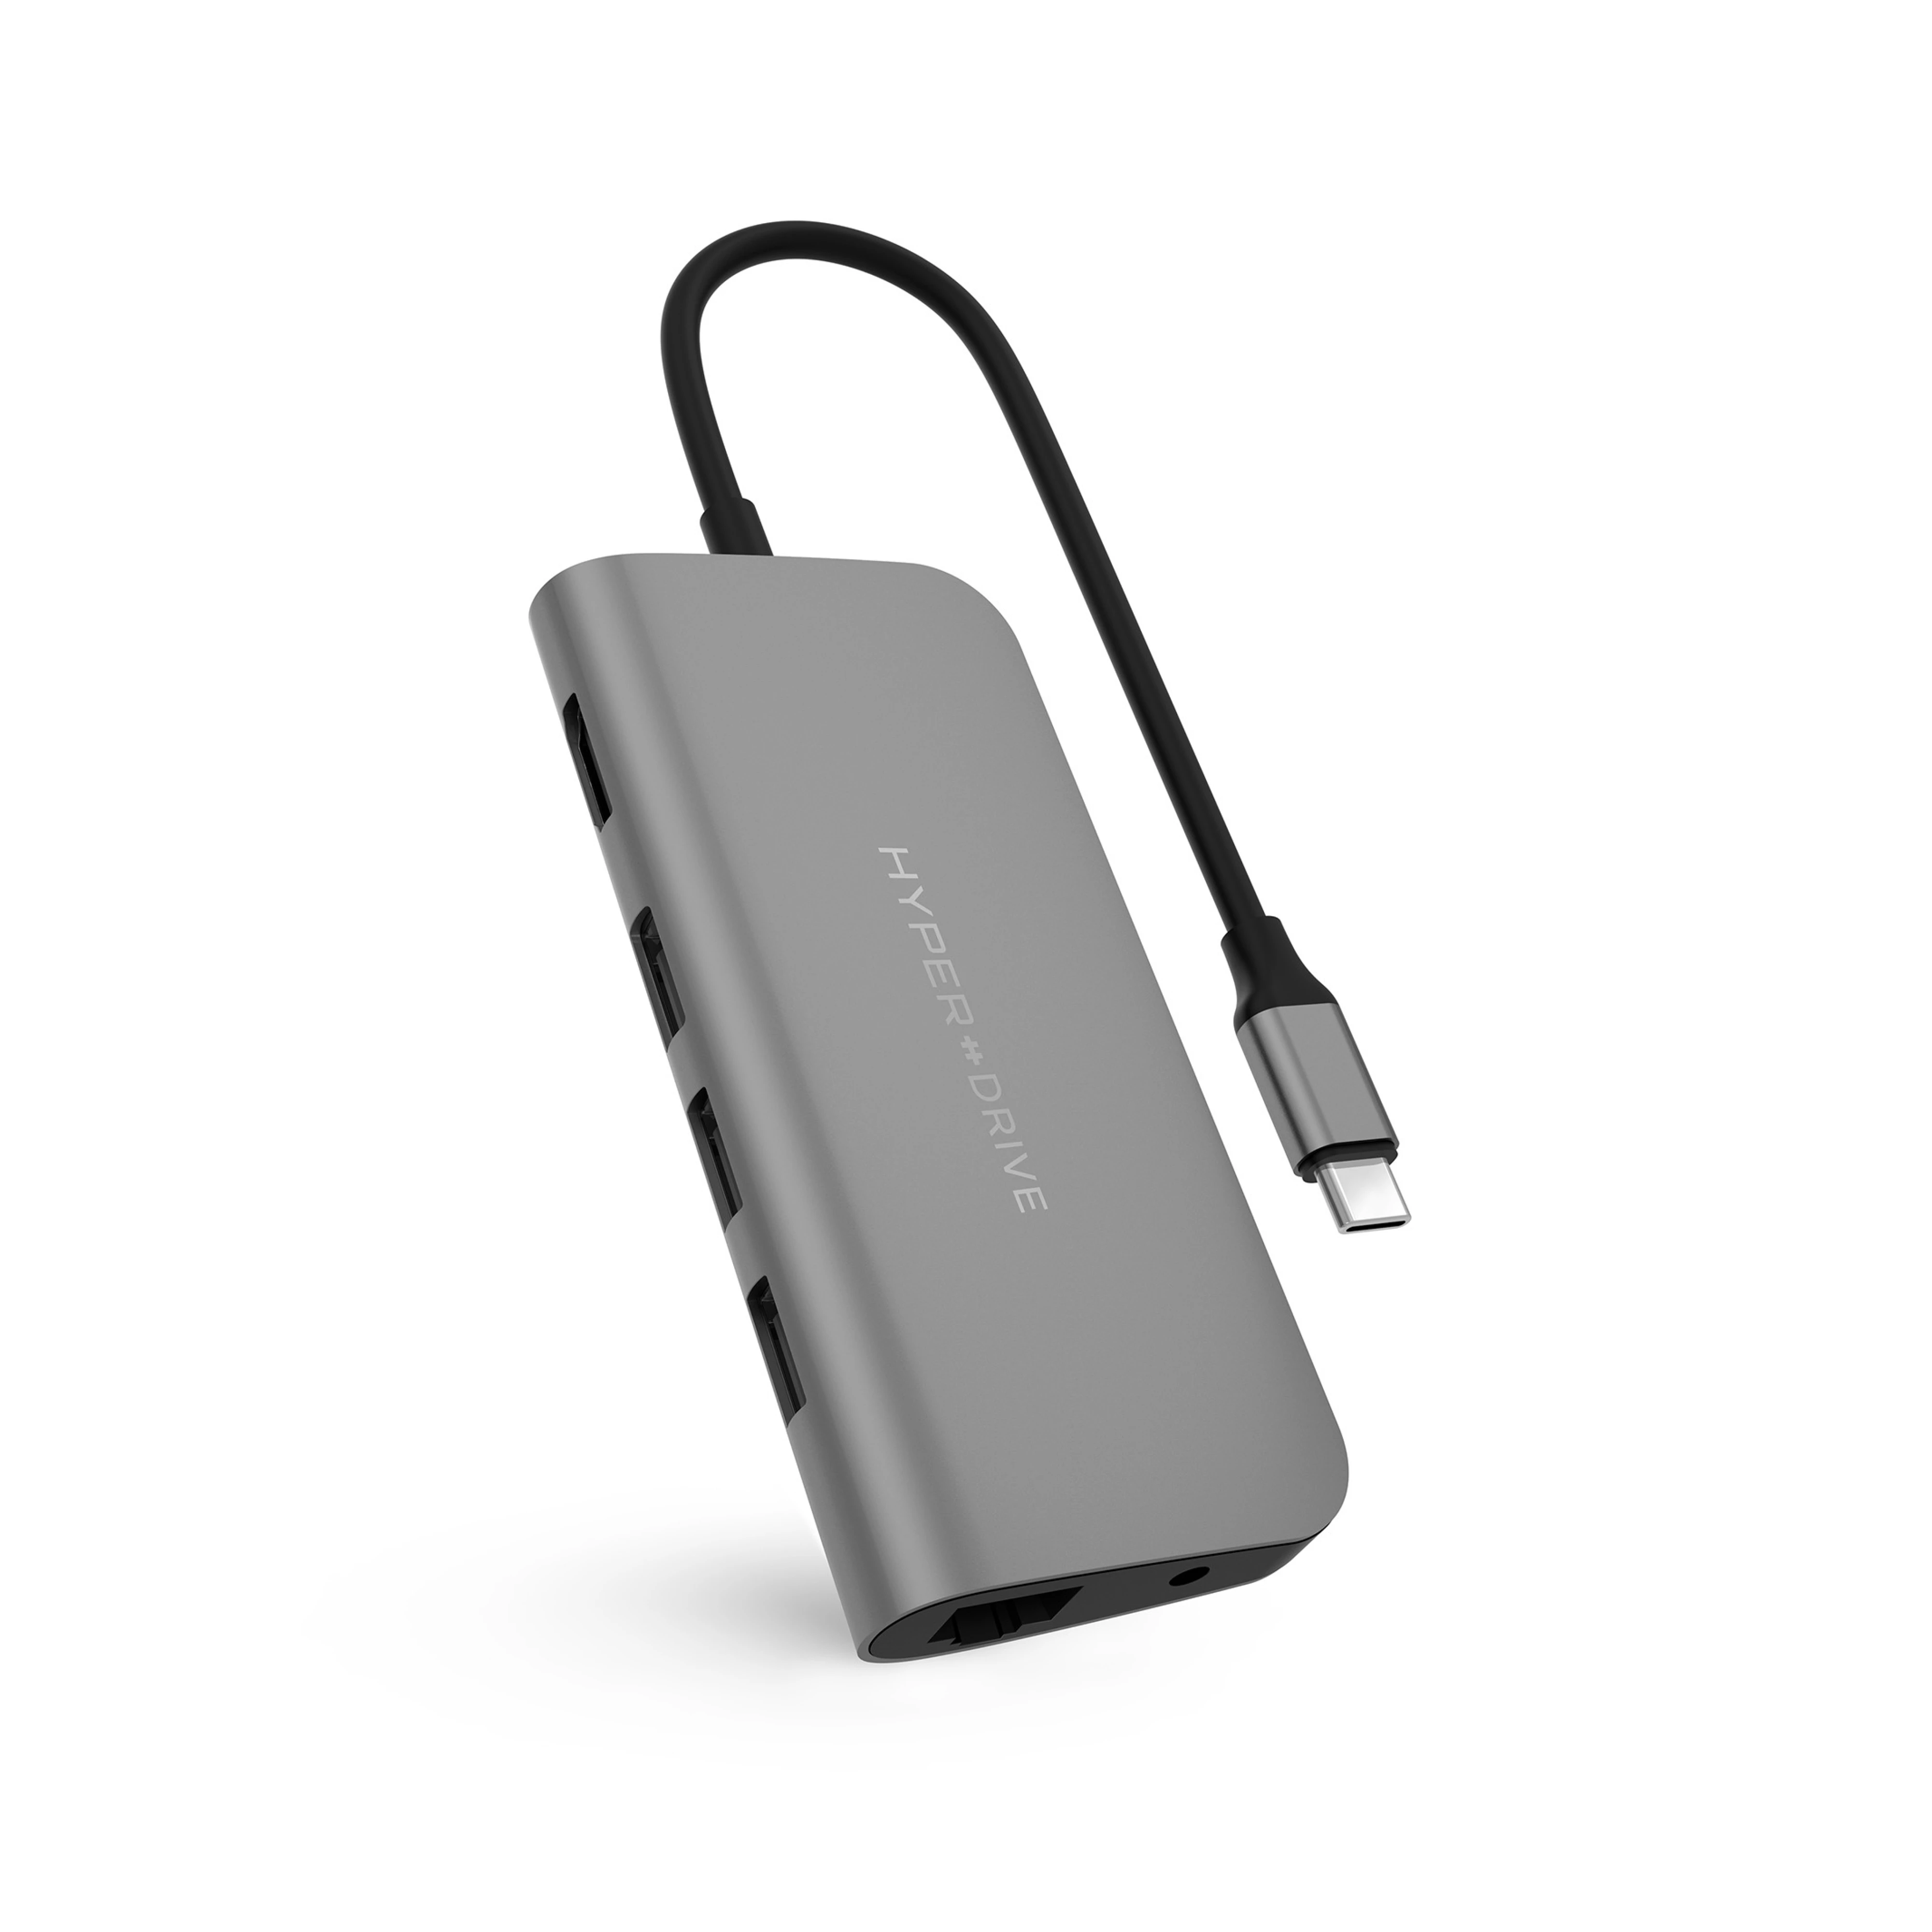 5-in-1 USB-C Ethernet Hub with Dual Monitor and 60W Power Delivery